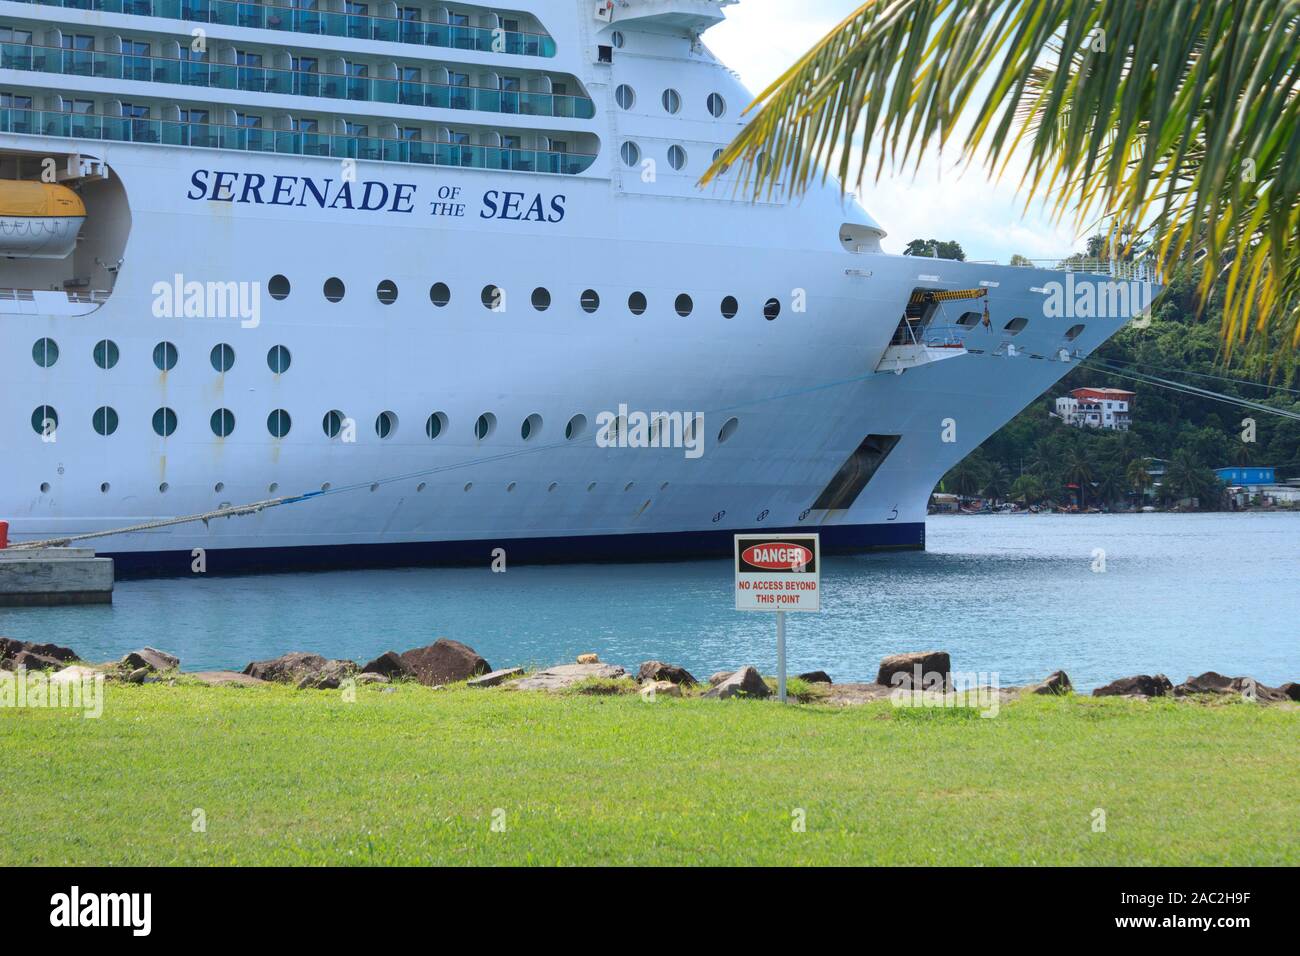 Castries, Saint Lucia - November 23, 2019. The vessel Serenade of the Seas docked at Castries harbor in Saint Lucia on a bright afternoon Stock Photo